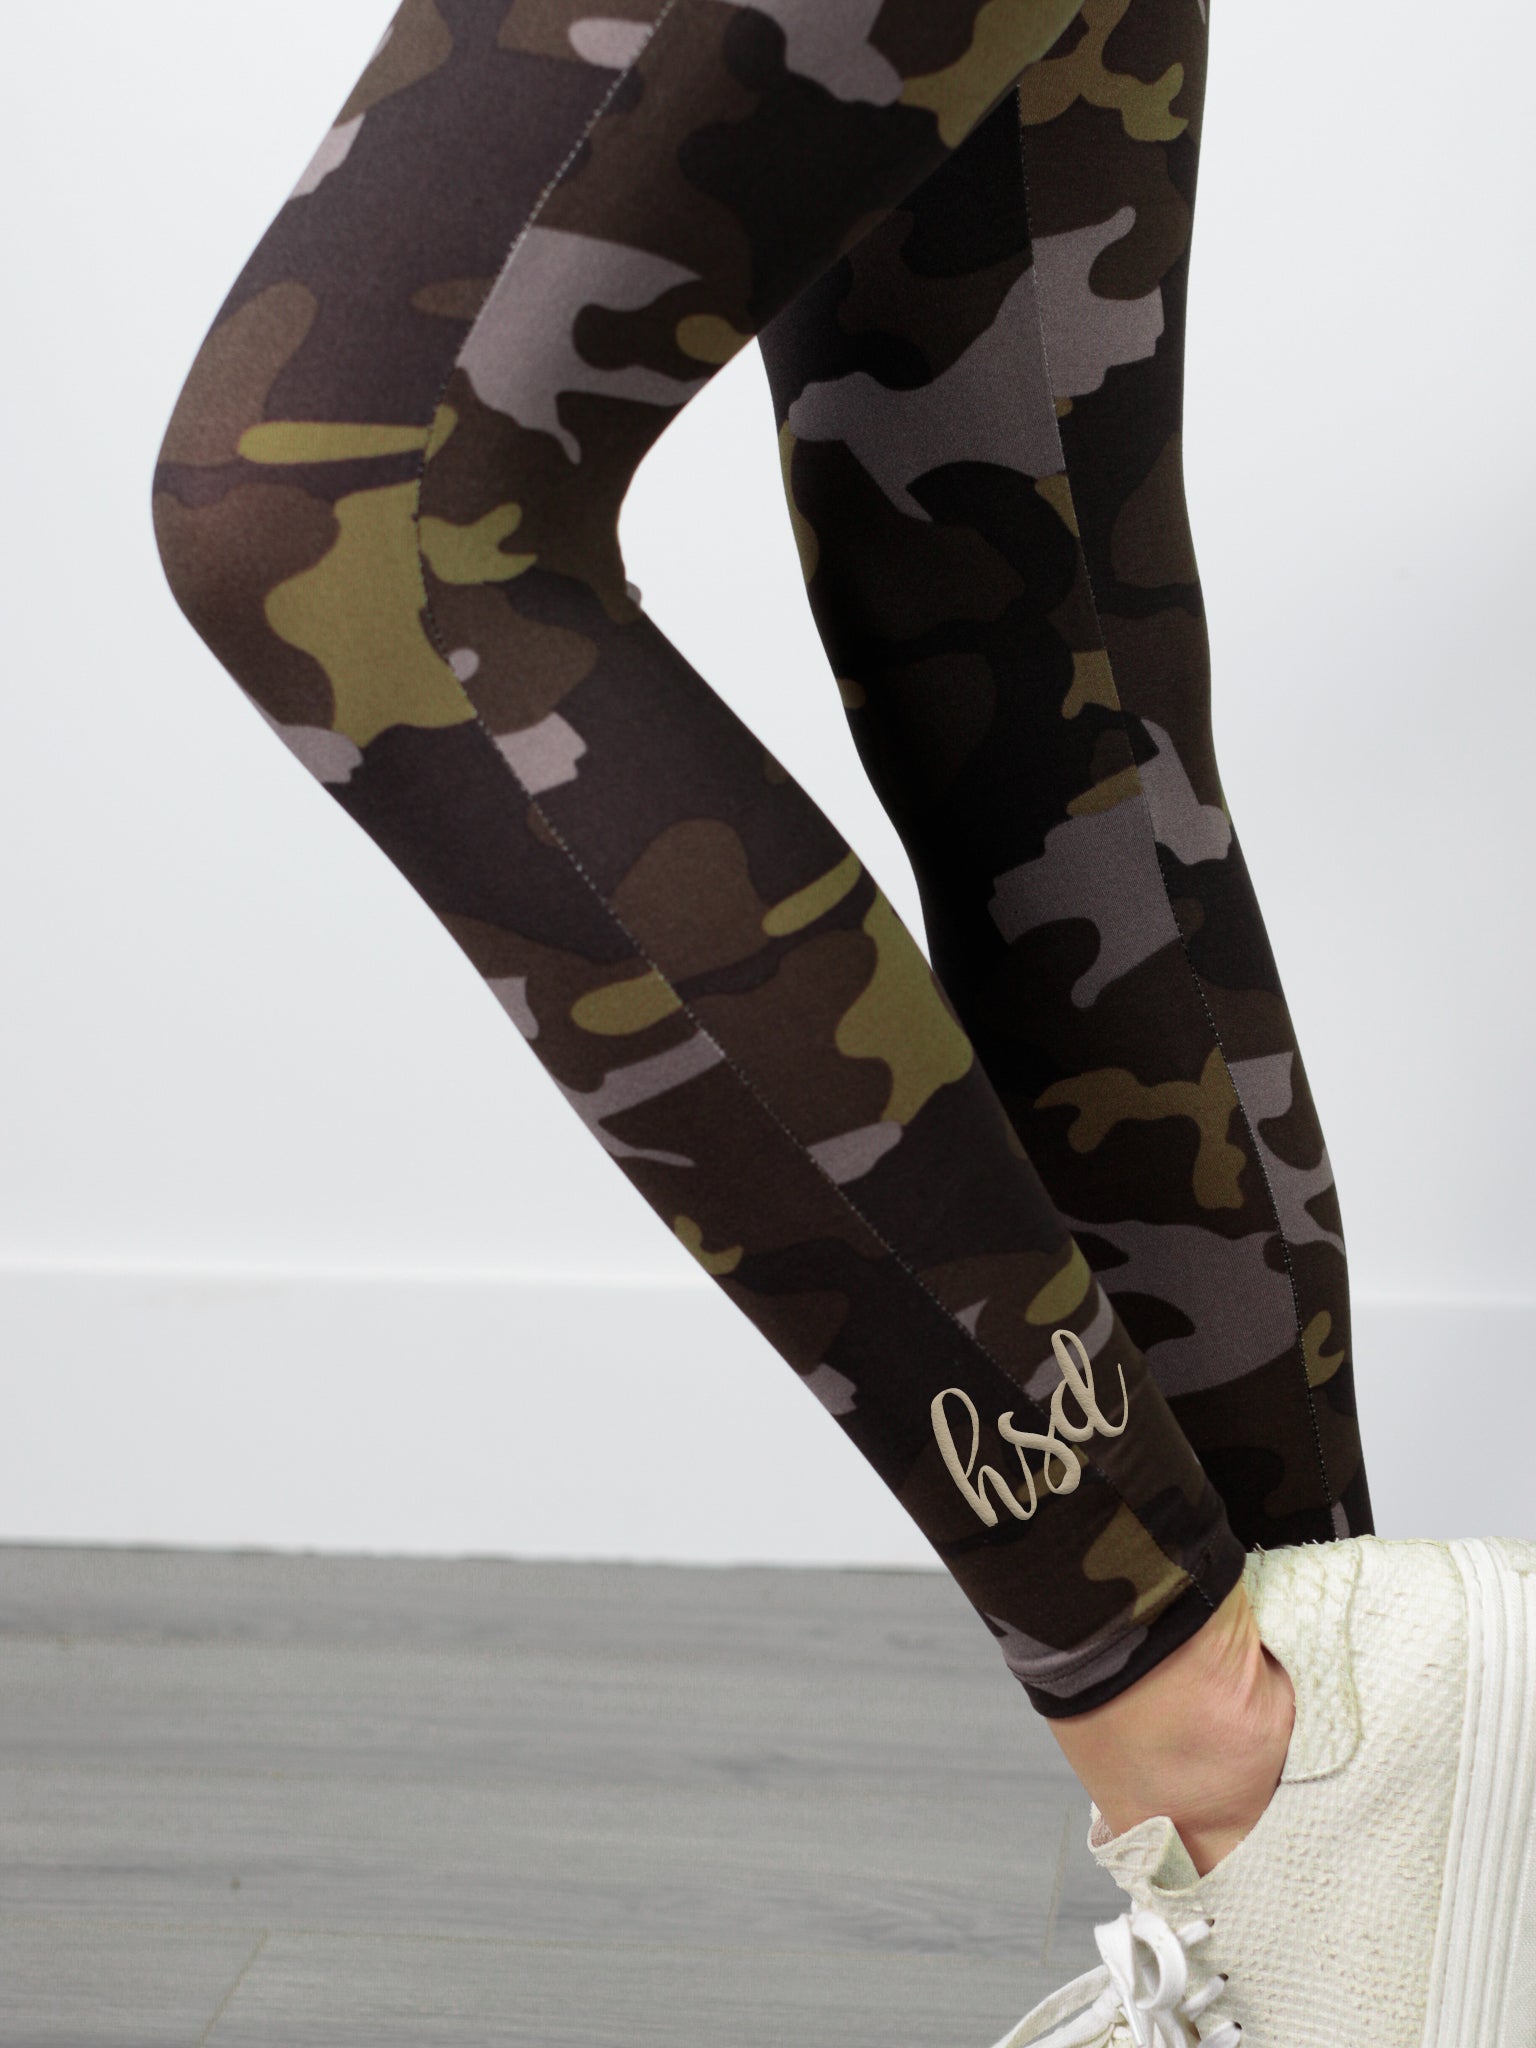  Southern Designs Huntress Black Camo Leggings for Any